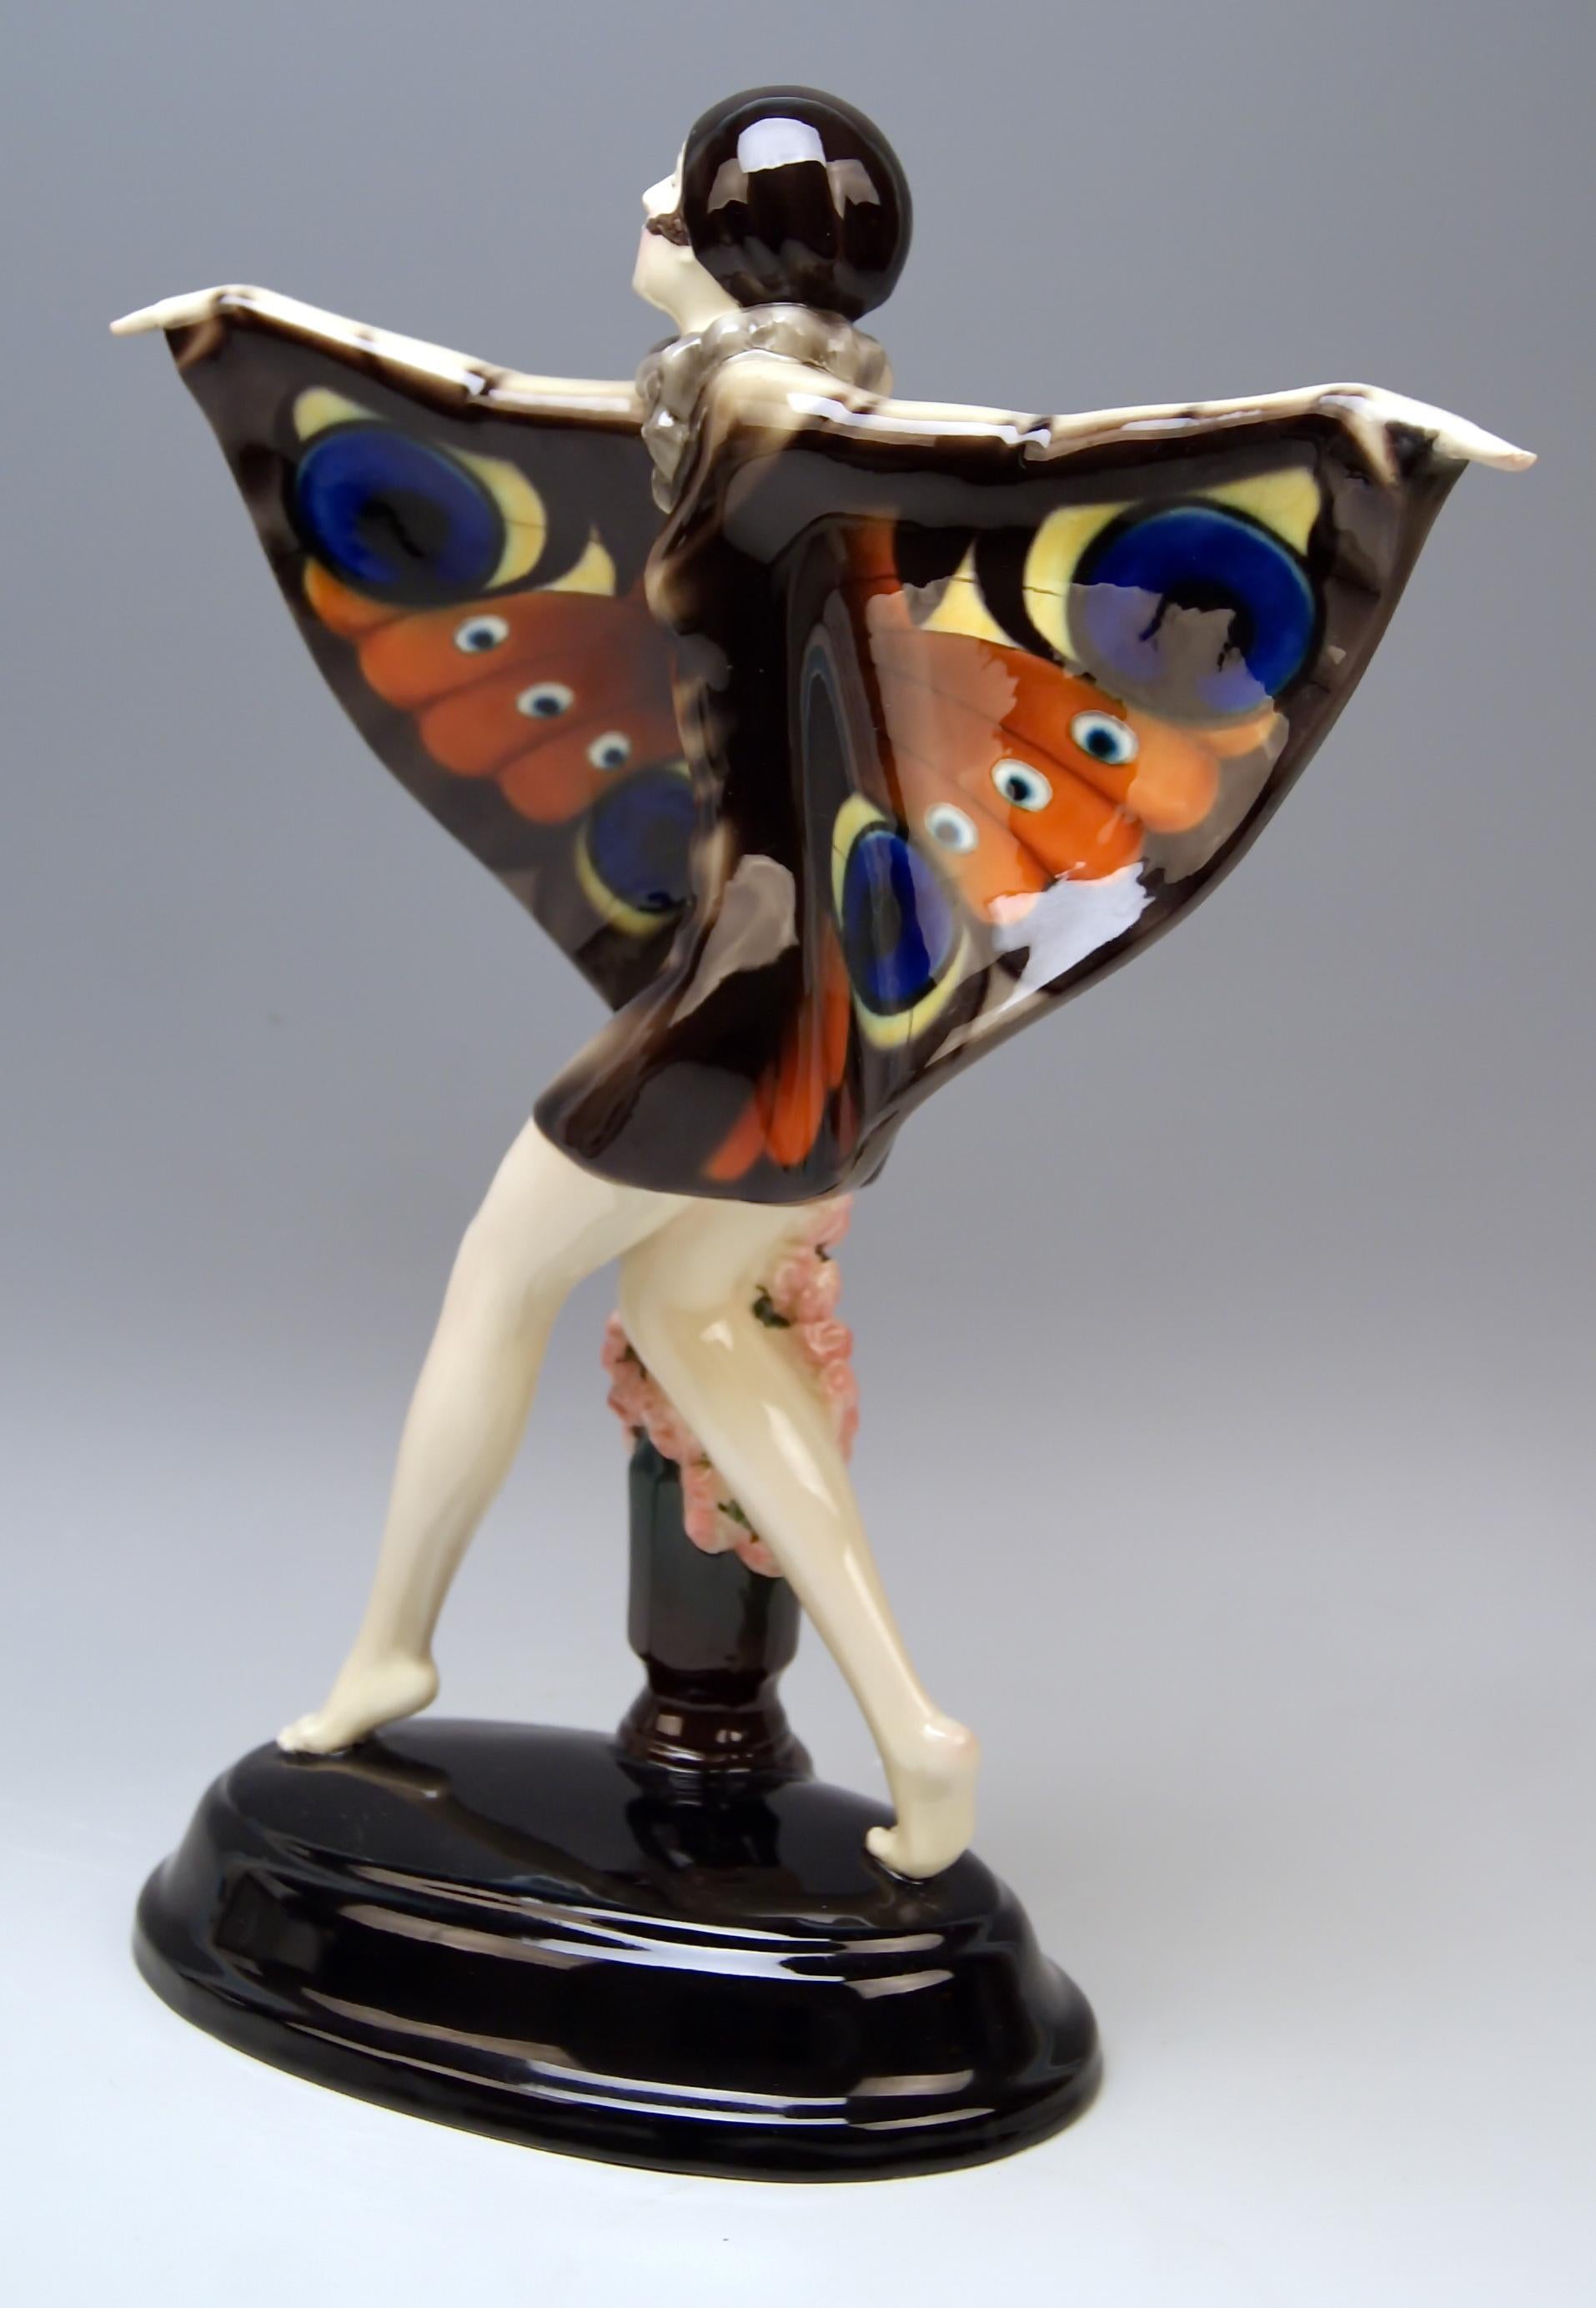 Goldscheider Vienna gorgeous dancingly lady figurine: The captured bird.

Designed by Josef Lorenzl (1892 - 1950) / one of the most important designers
having been active for Goldscheider manufactory in period of 1920 - 1940 / Designed 1922